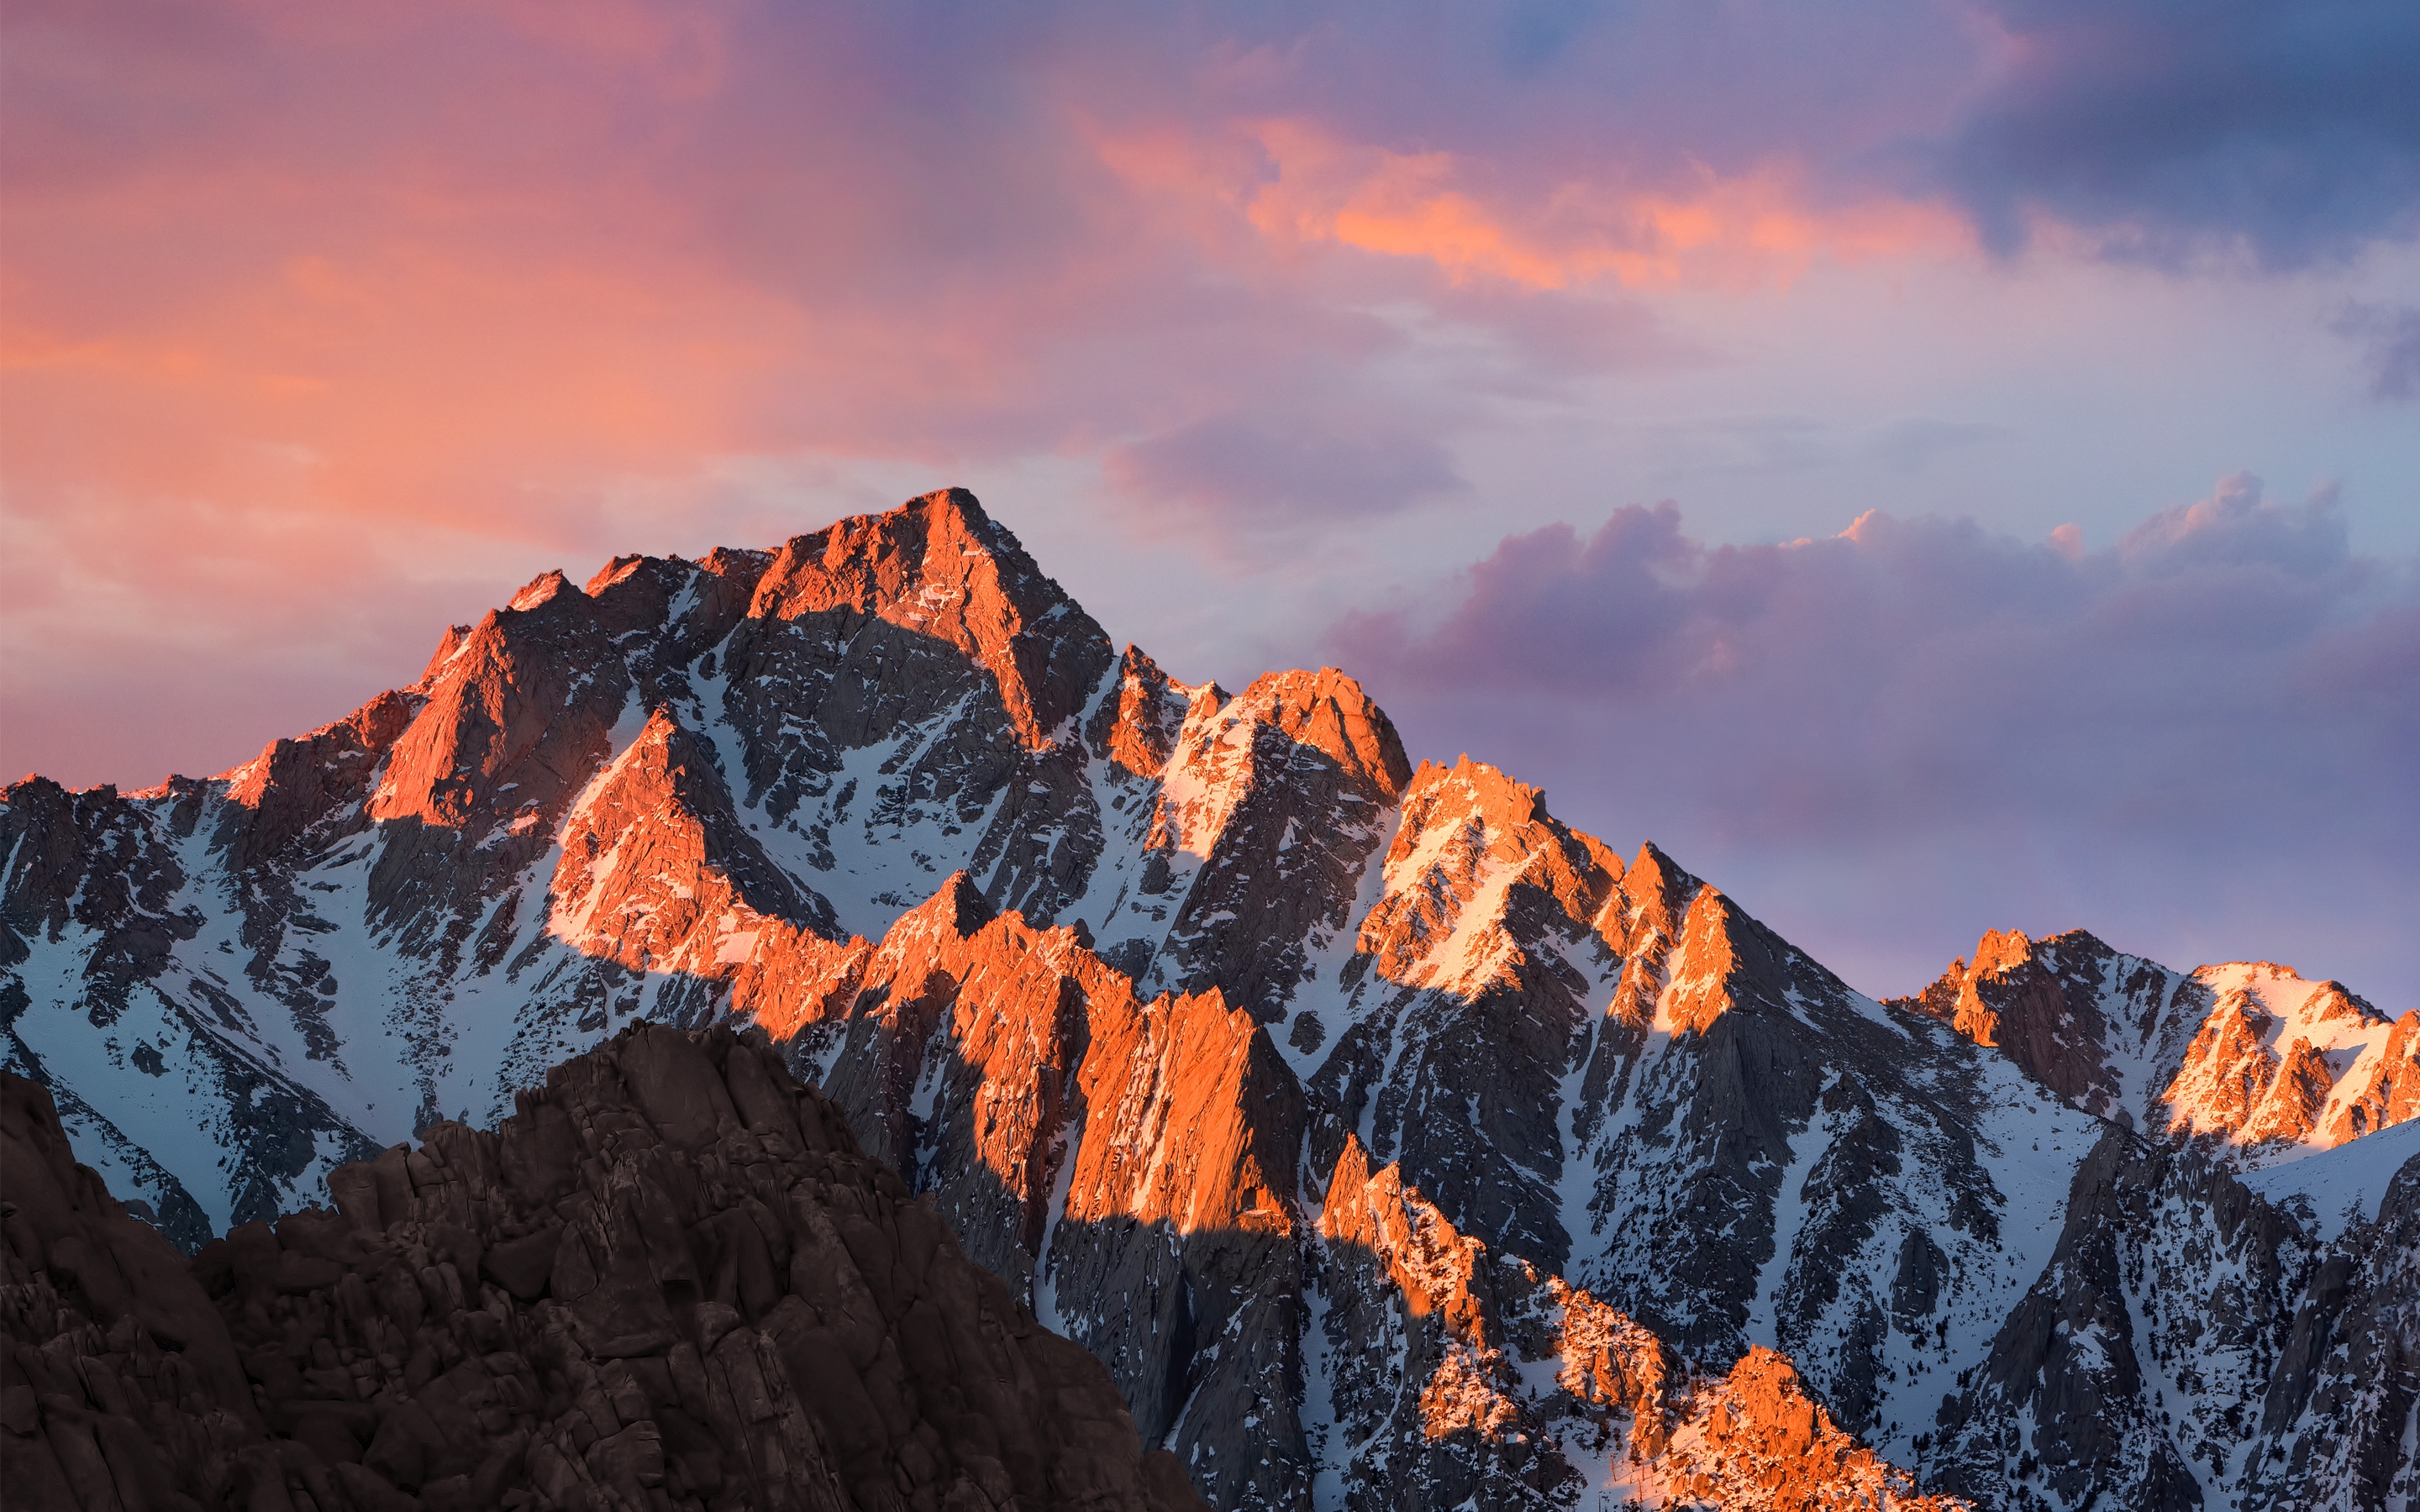 Download the new macos sierra wallpaper for iphone ipad and desktop